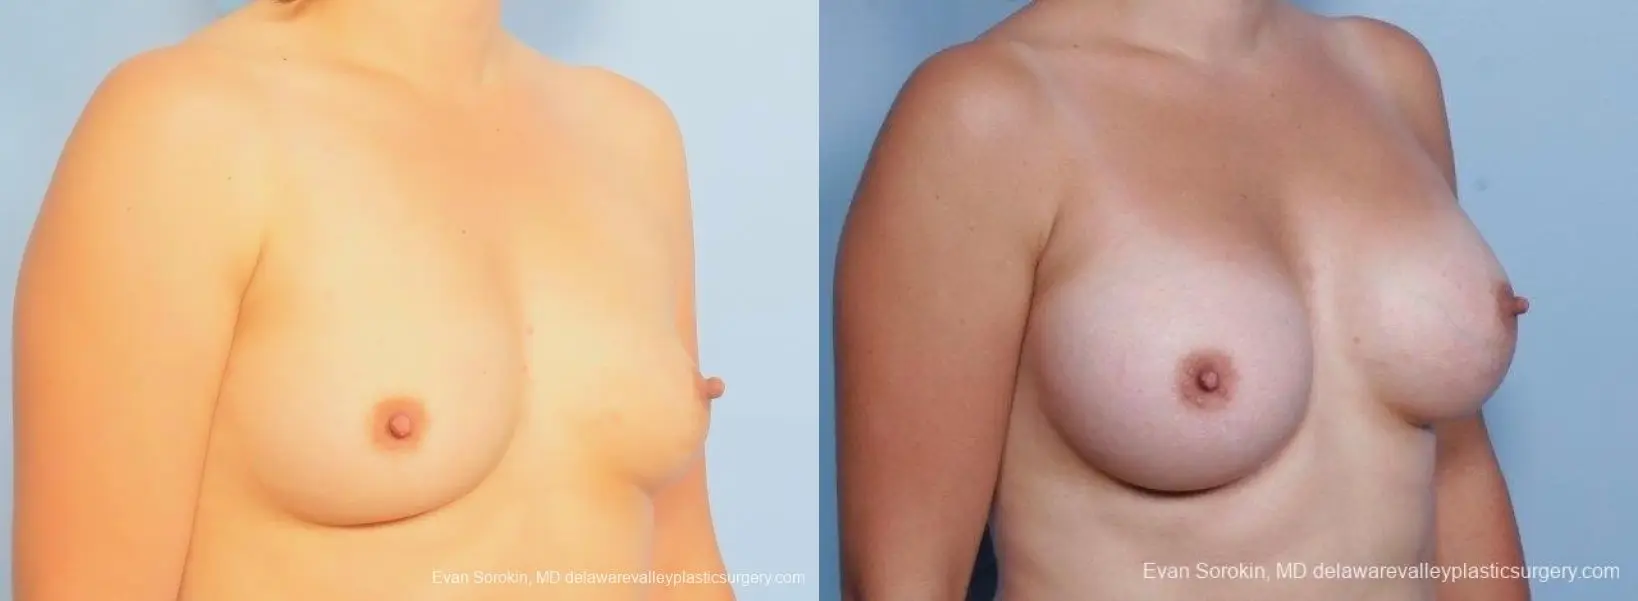 Philadelphia Breast Augmentation 8797 - Before and After 2